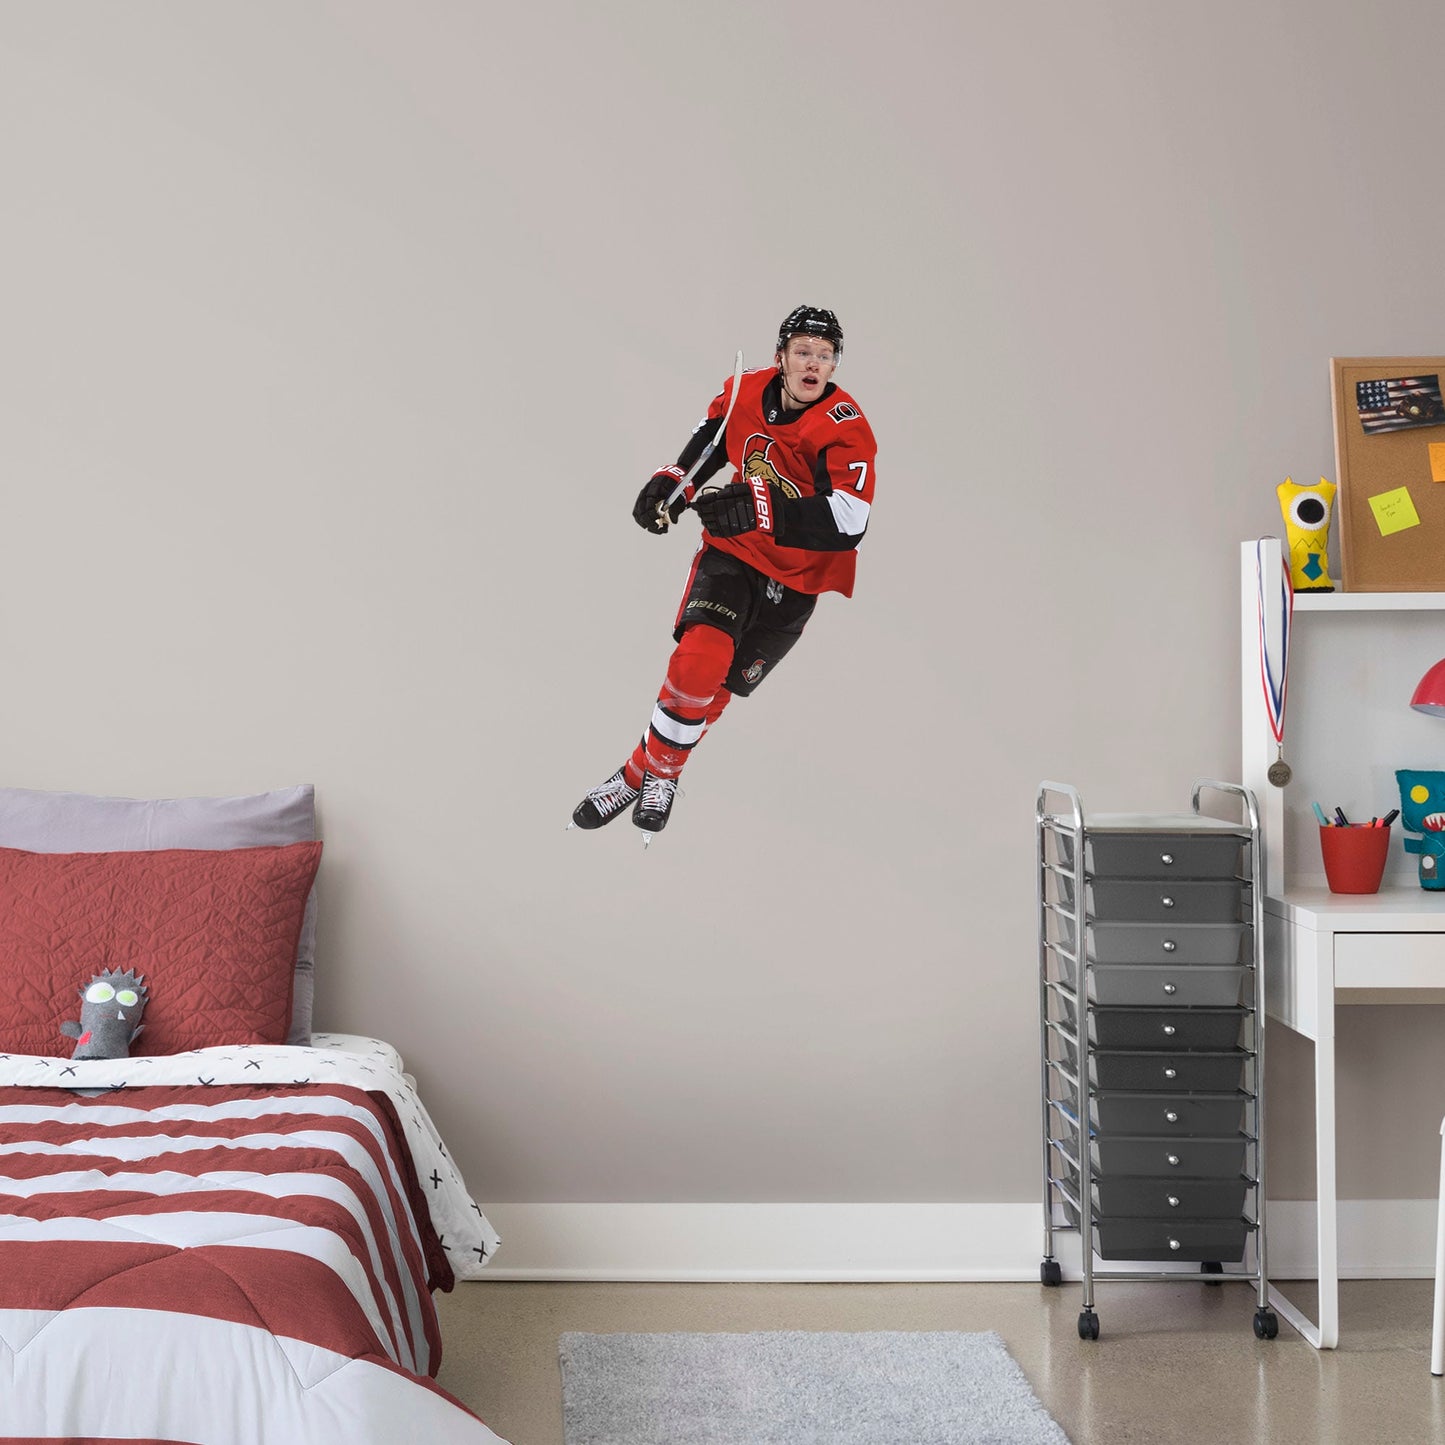 X-Large Athlete + 2 Team Decals (22"W x 38"H) Power forward Brady Tkachuk quickly made his mark in the NHL when he lead the Senators to victory, and now he's skating to life in your office, bedroom, or fan room in this Officially Licensed NHL wall decal. Ottawa fans and NHL fanatics alike will love the touch of action that Tkachuk brings, and this durable and removable wall decal will definitely stand up to the challenge, no matter how many times you restick it!